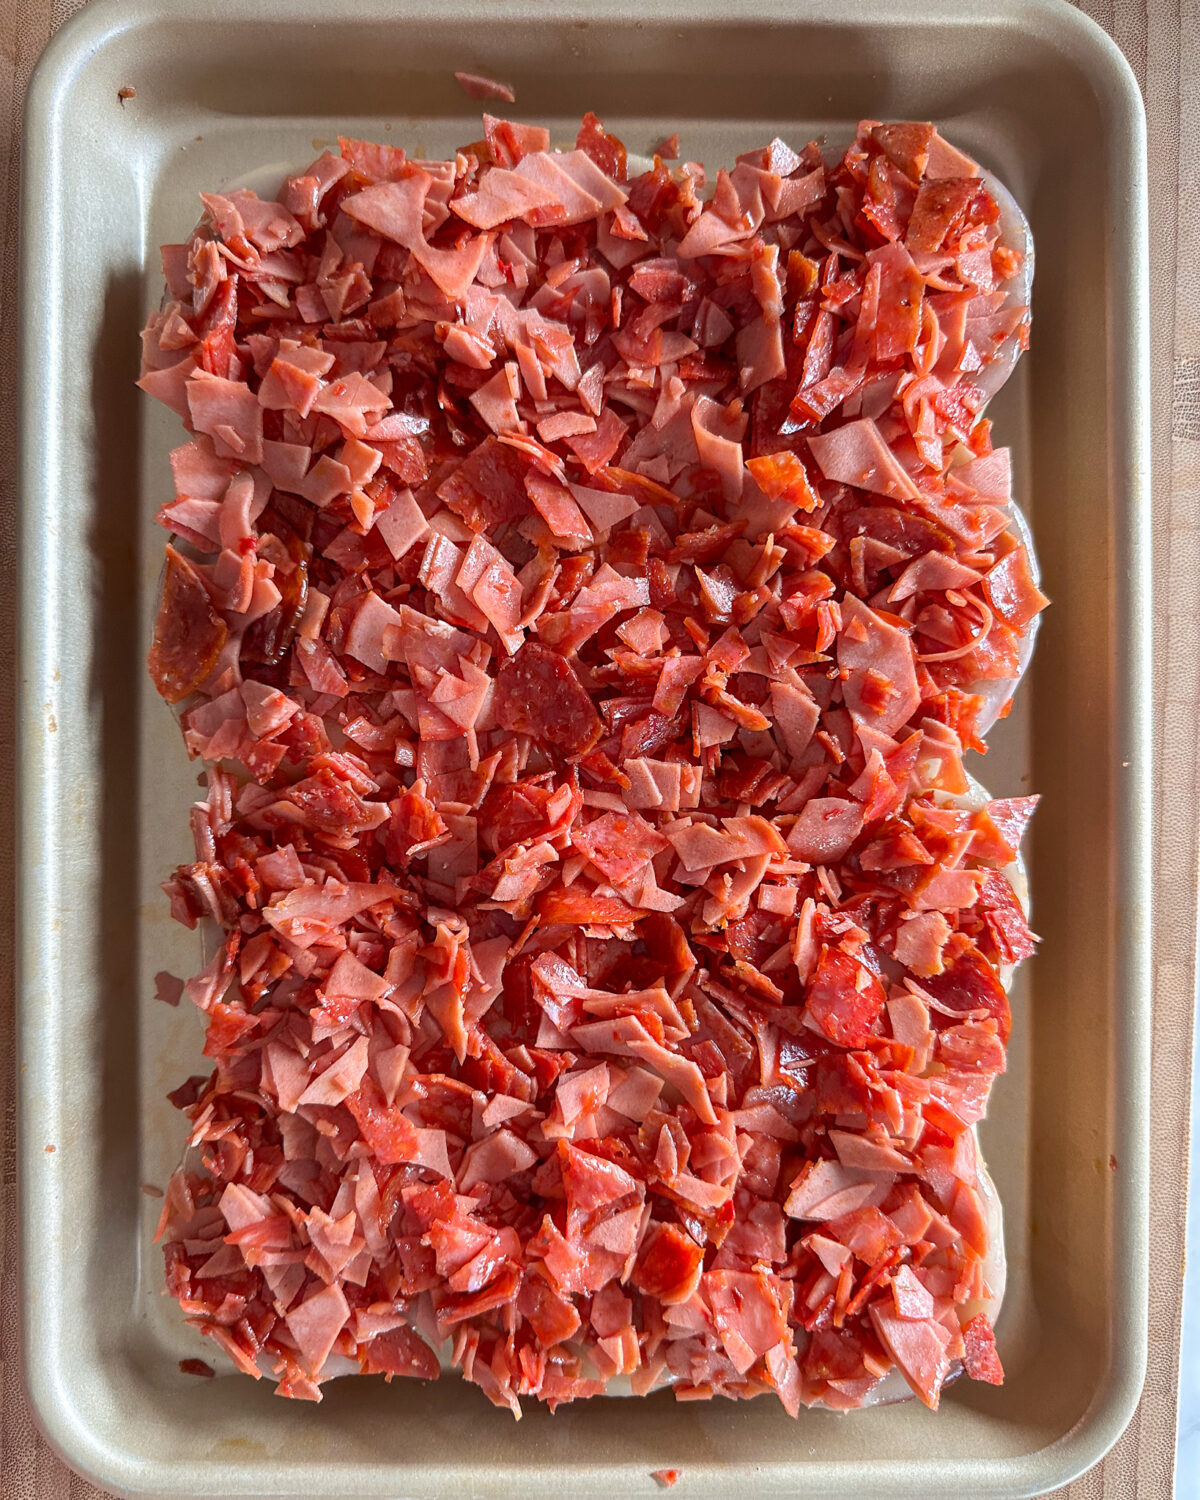 A layer of chopped deli meats spread on toasted slider buns.